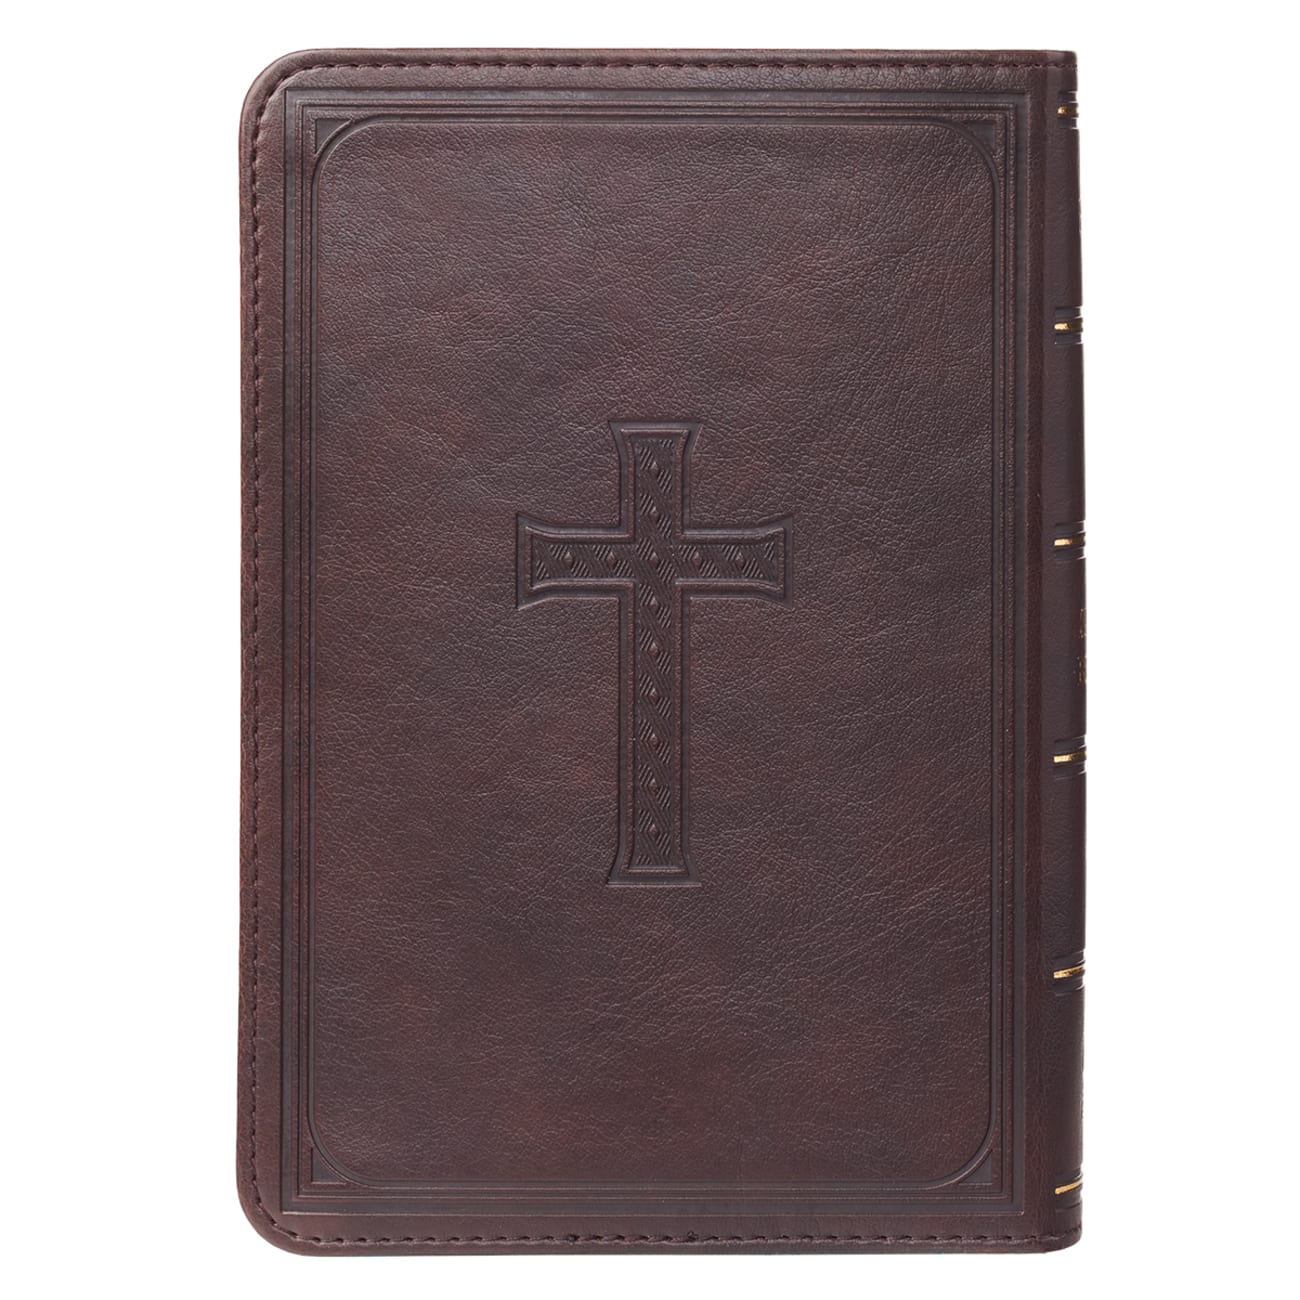 KJV Compact Large Print Dark Brown Red Letter Edition Imitation Leather